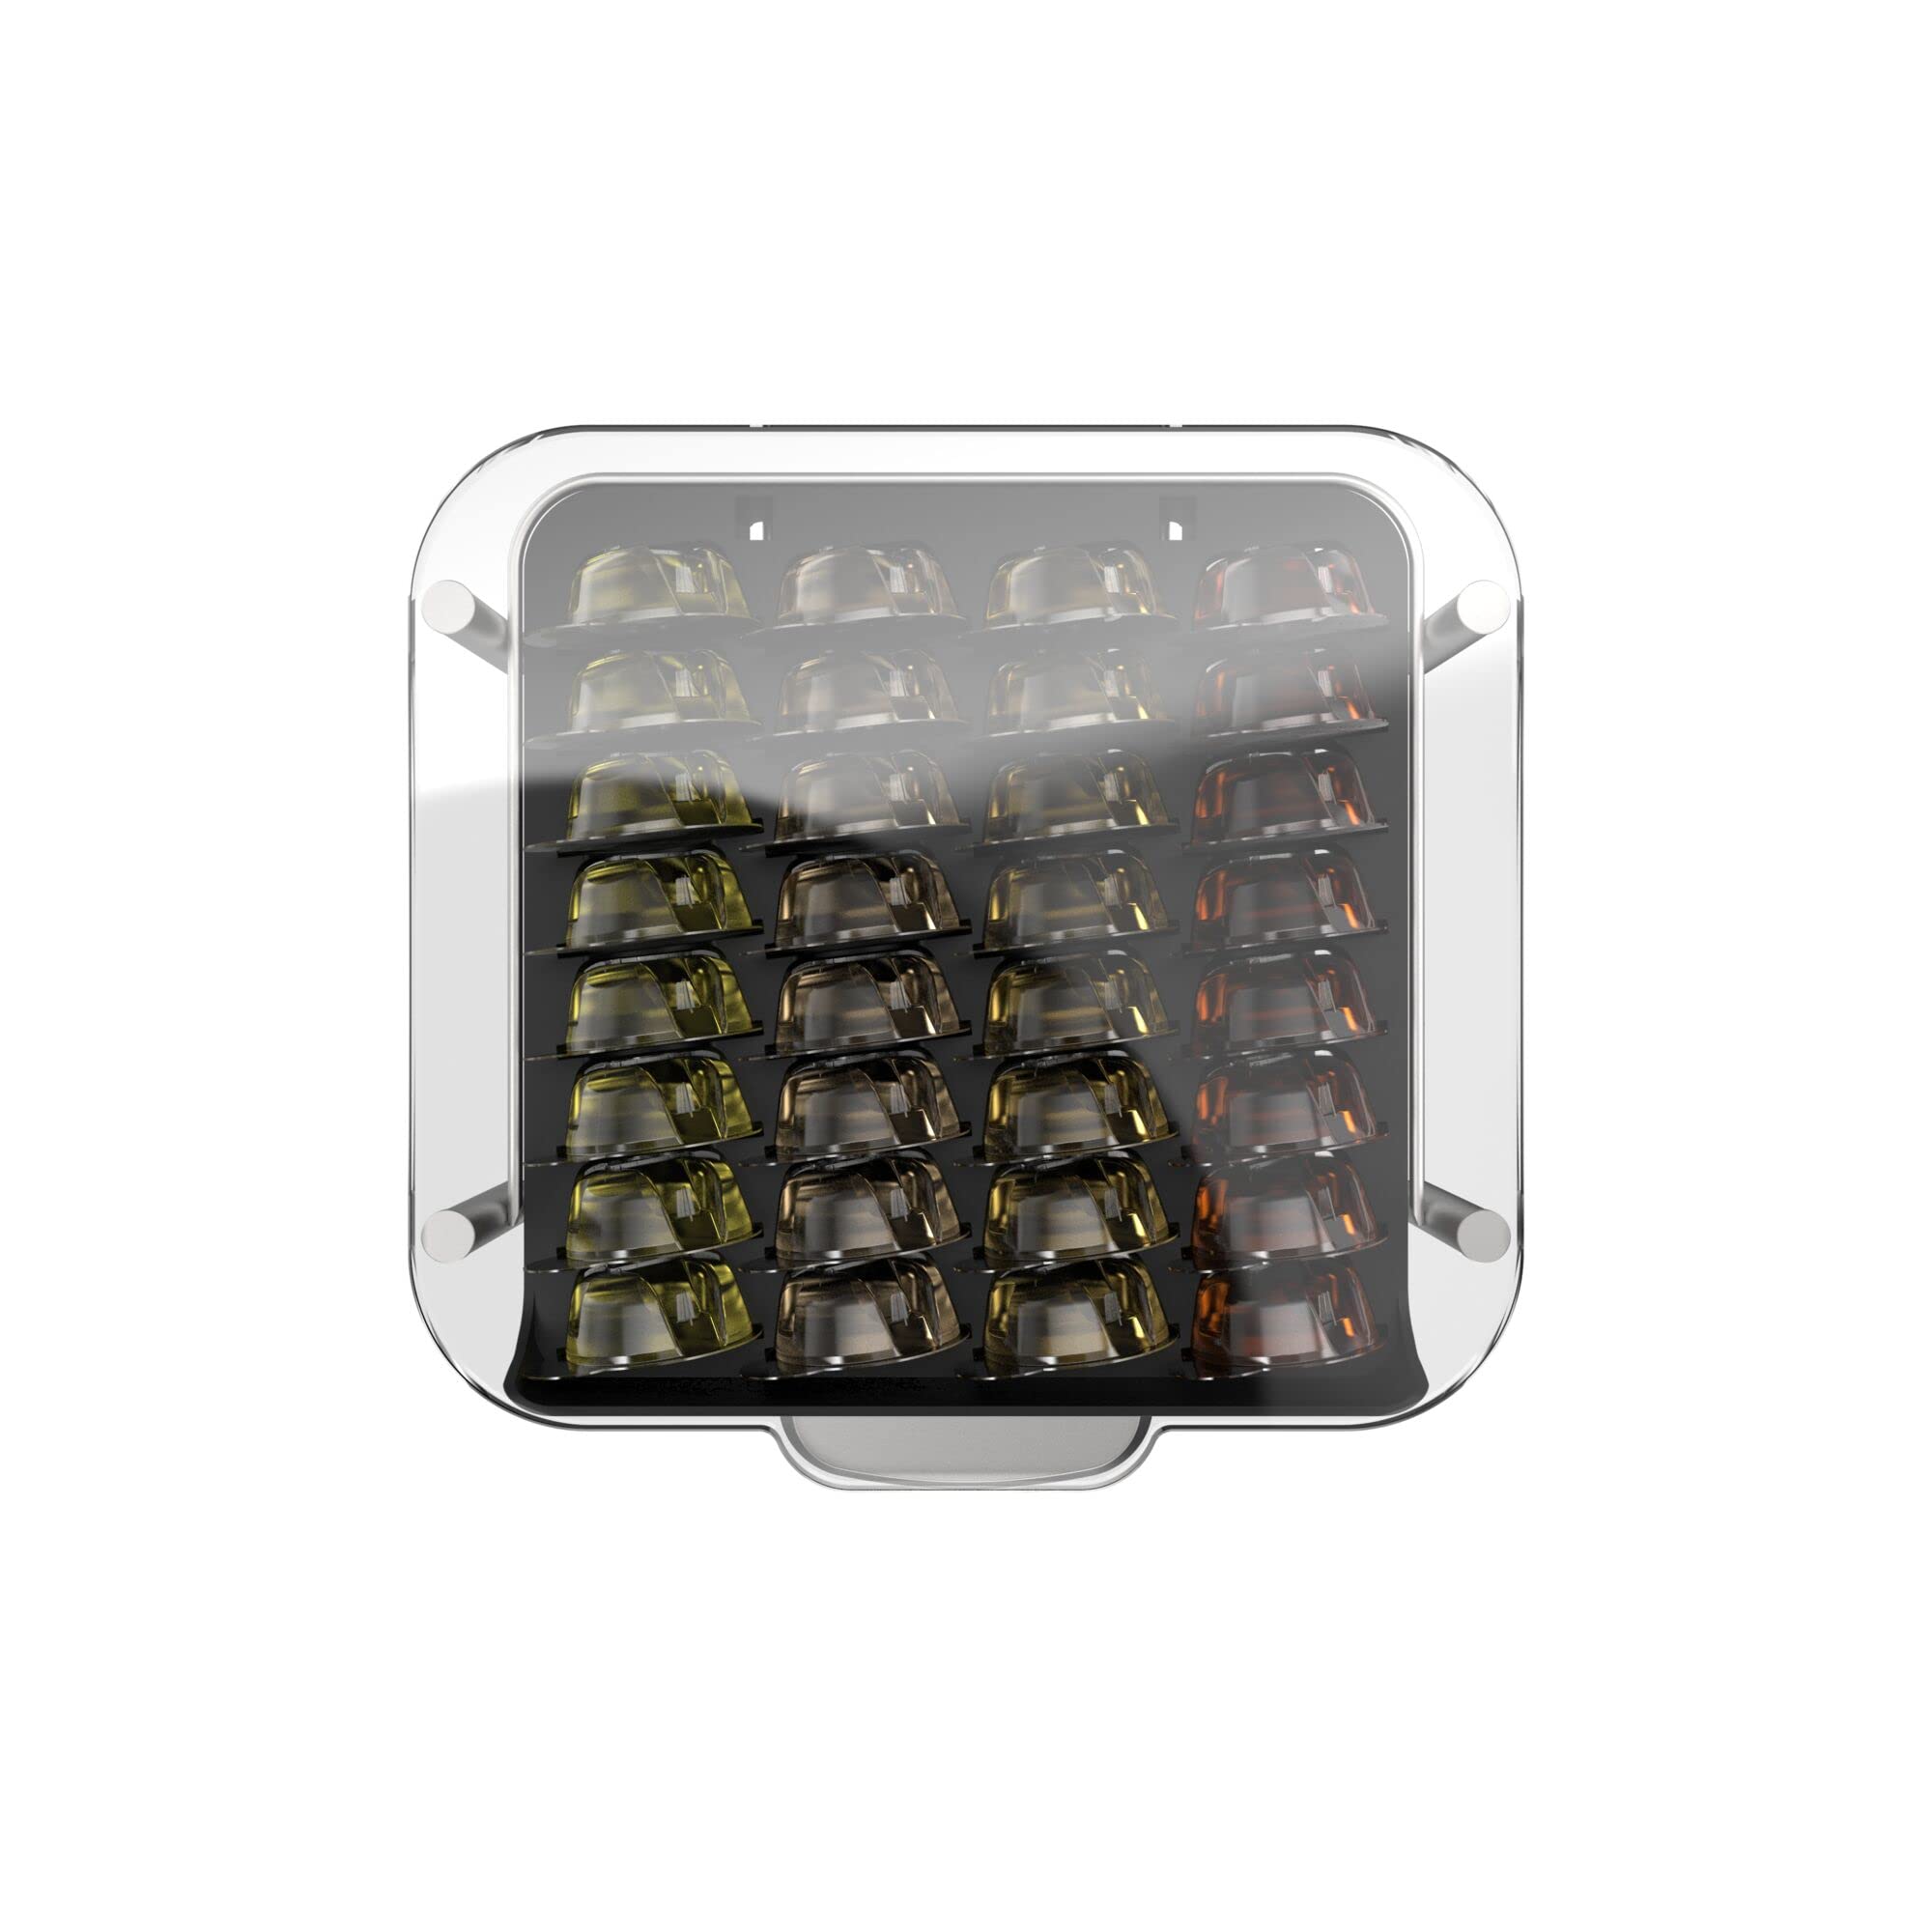 bev by BLACK+DECKER Cocktail Maker Storage Drawer for Bartesian Capsules, Holds up to 36 Bartesian Pods, Sturdy and Stackable Pod Holder (BECS132)